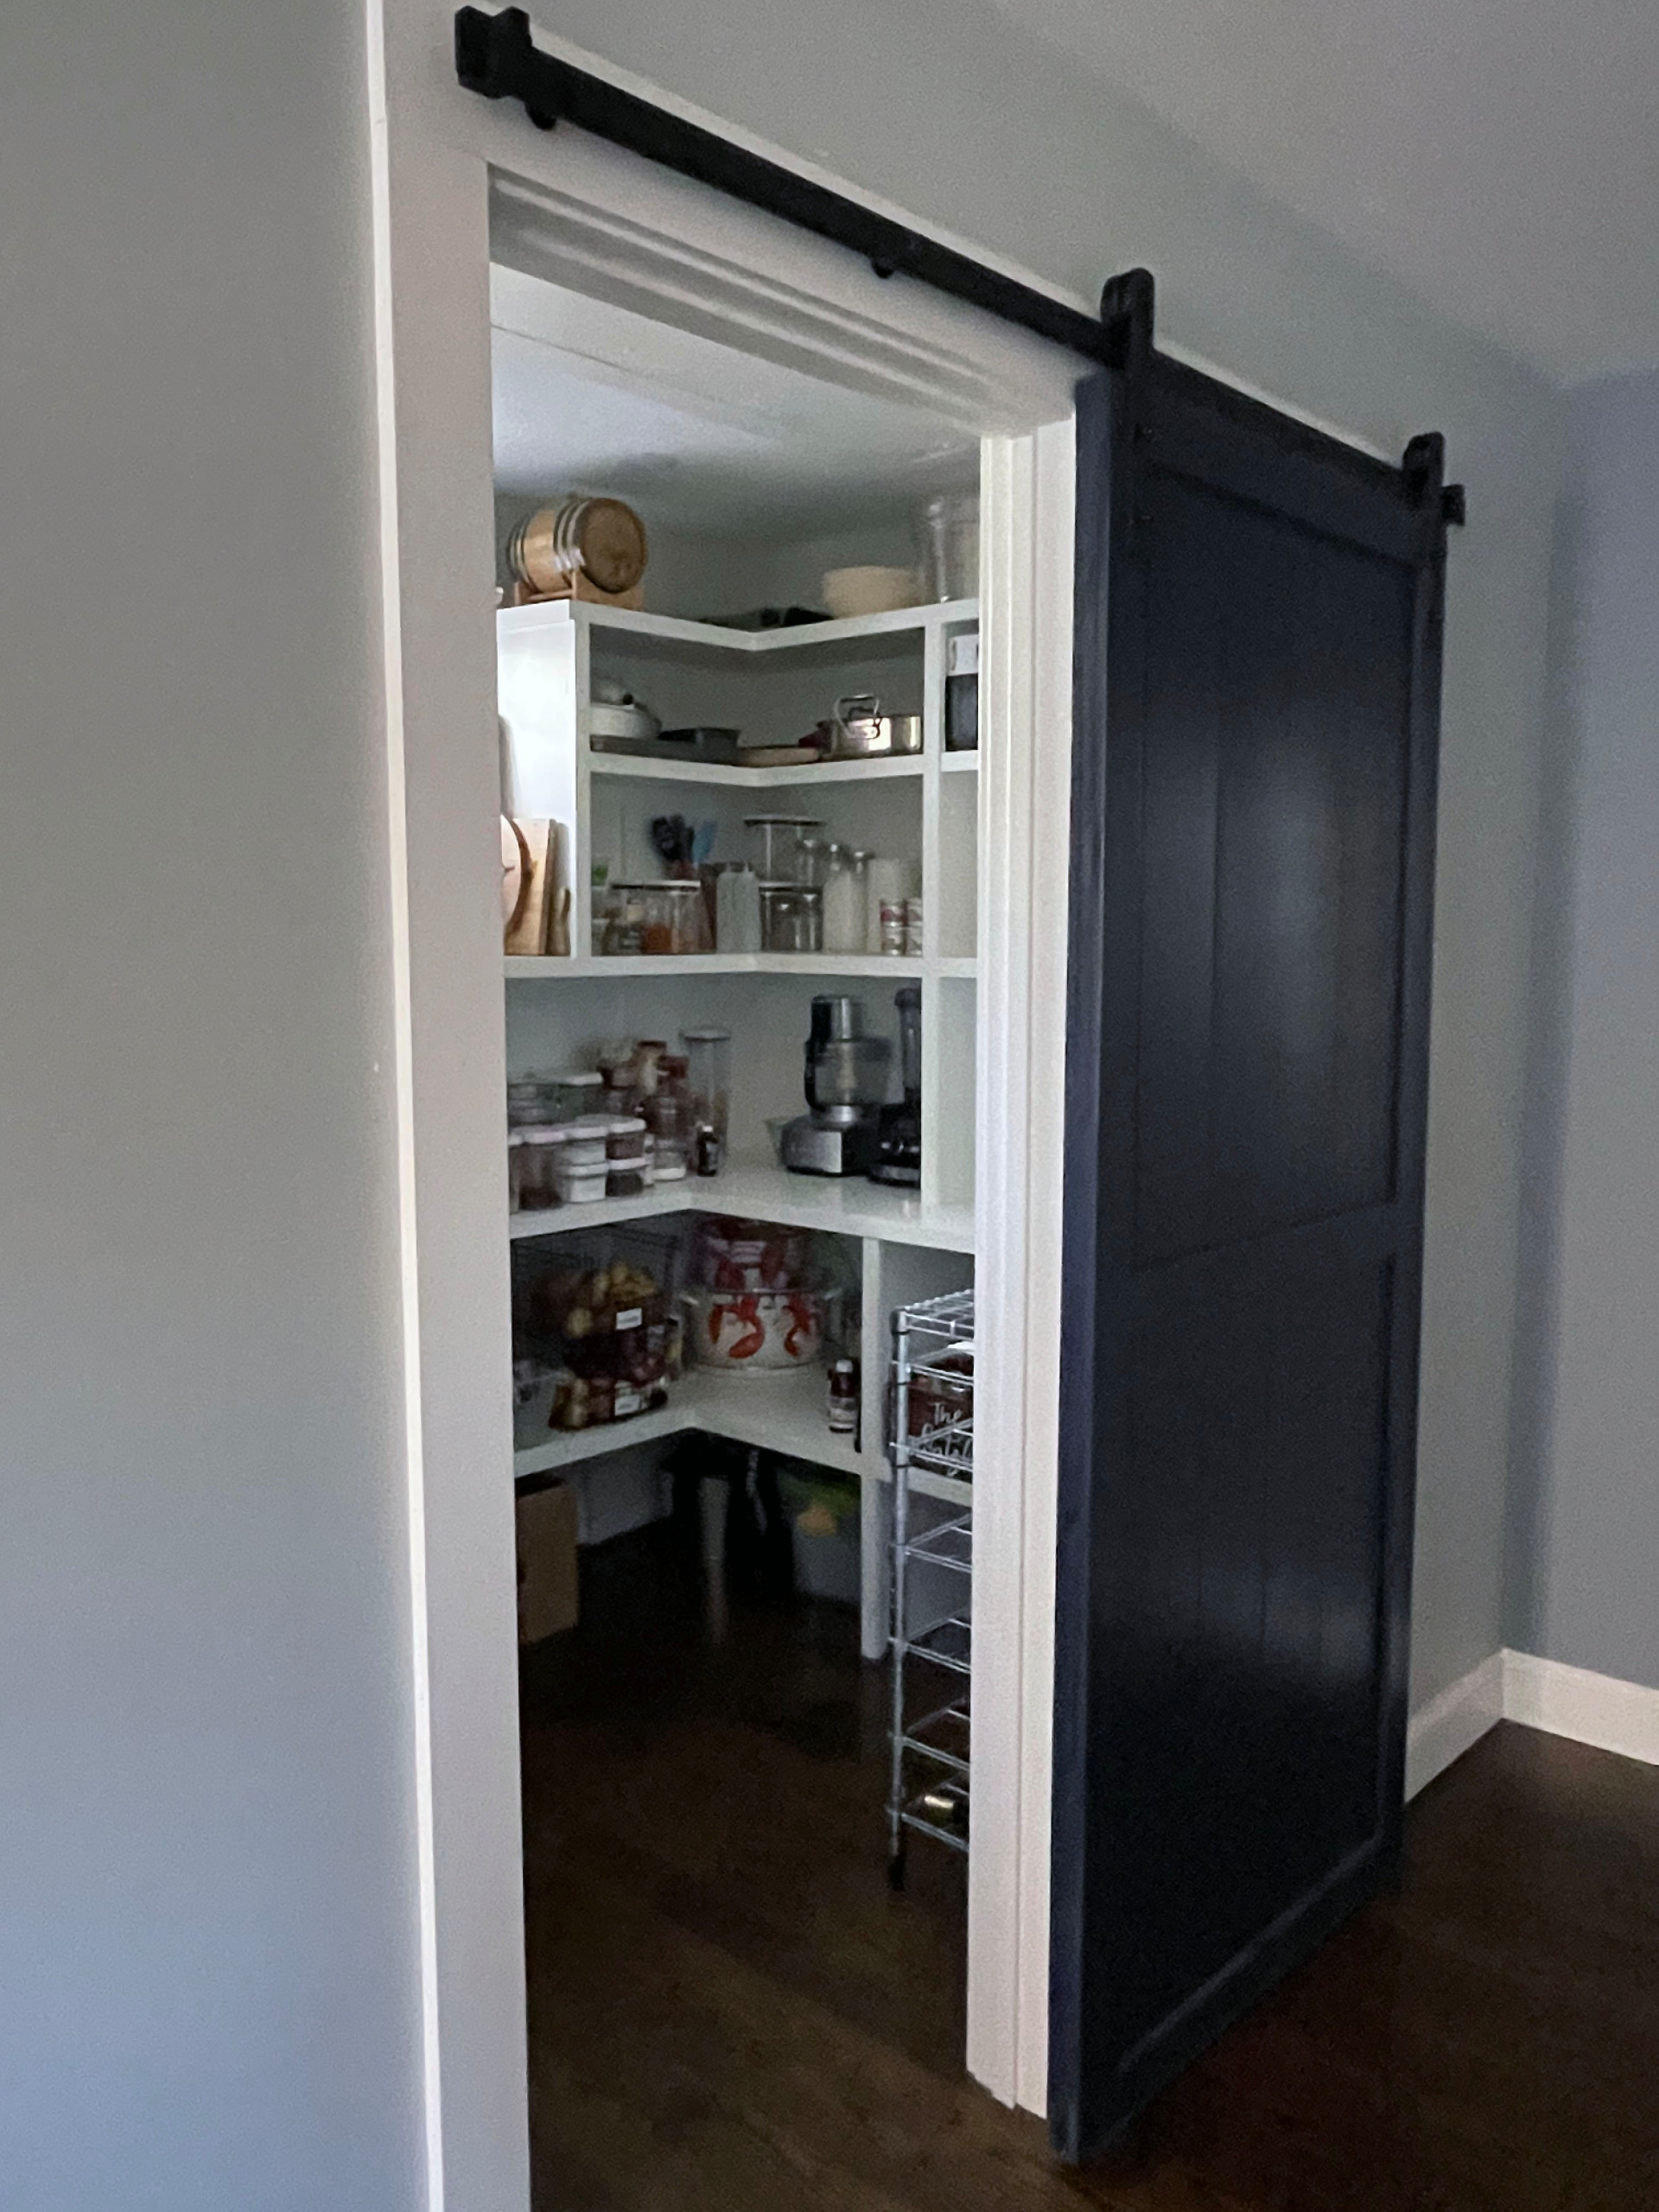 Main house pantry and laundry room